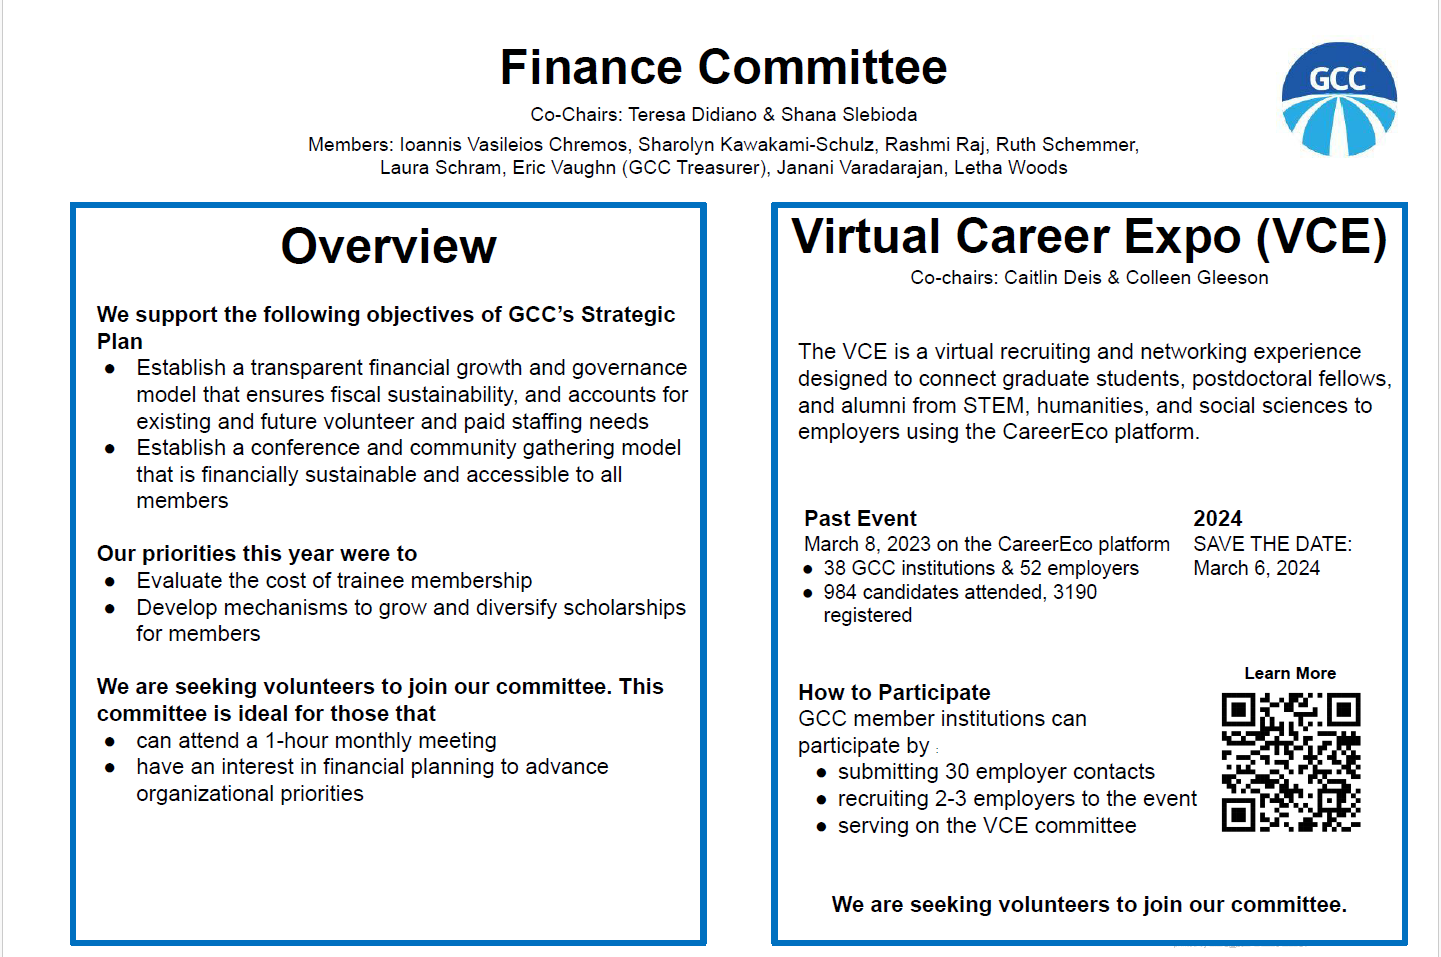 GCC Finance Committee and Virtual Career Expo Poster